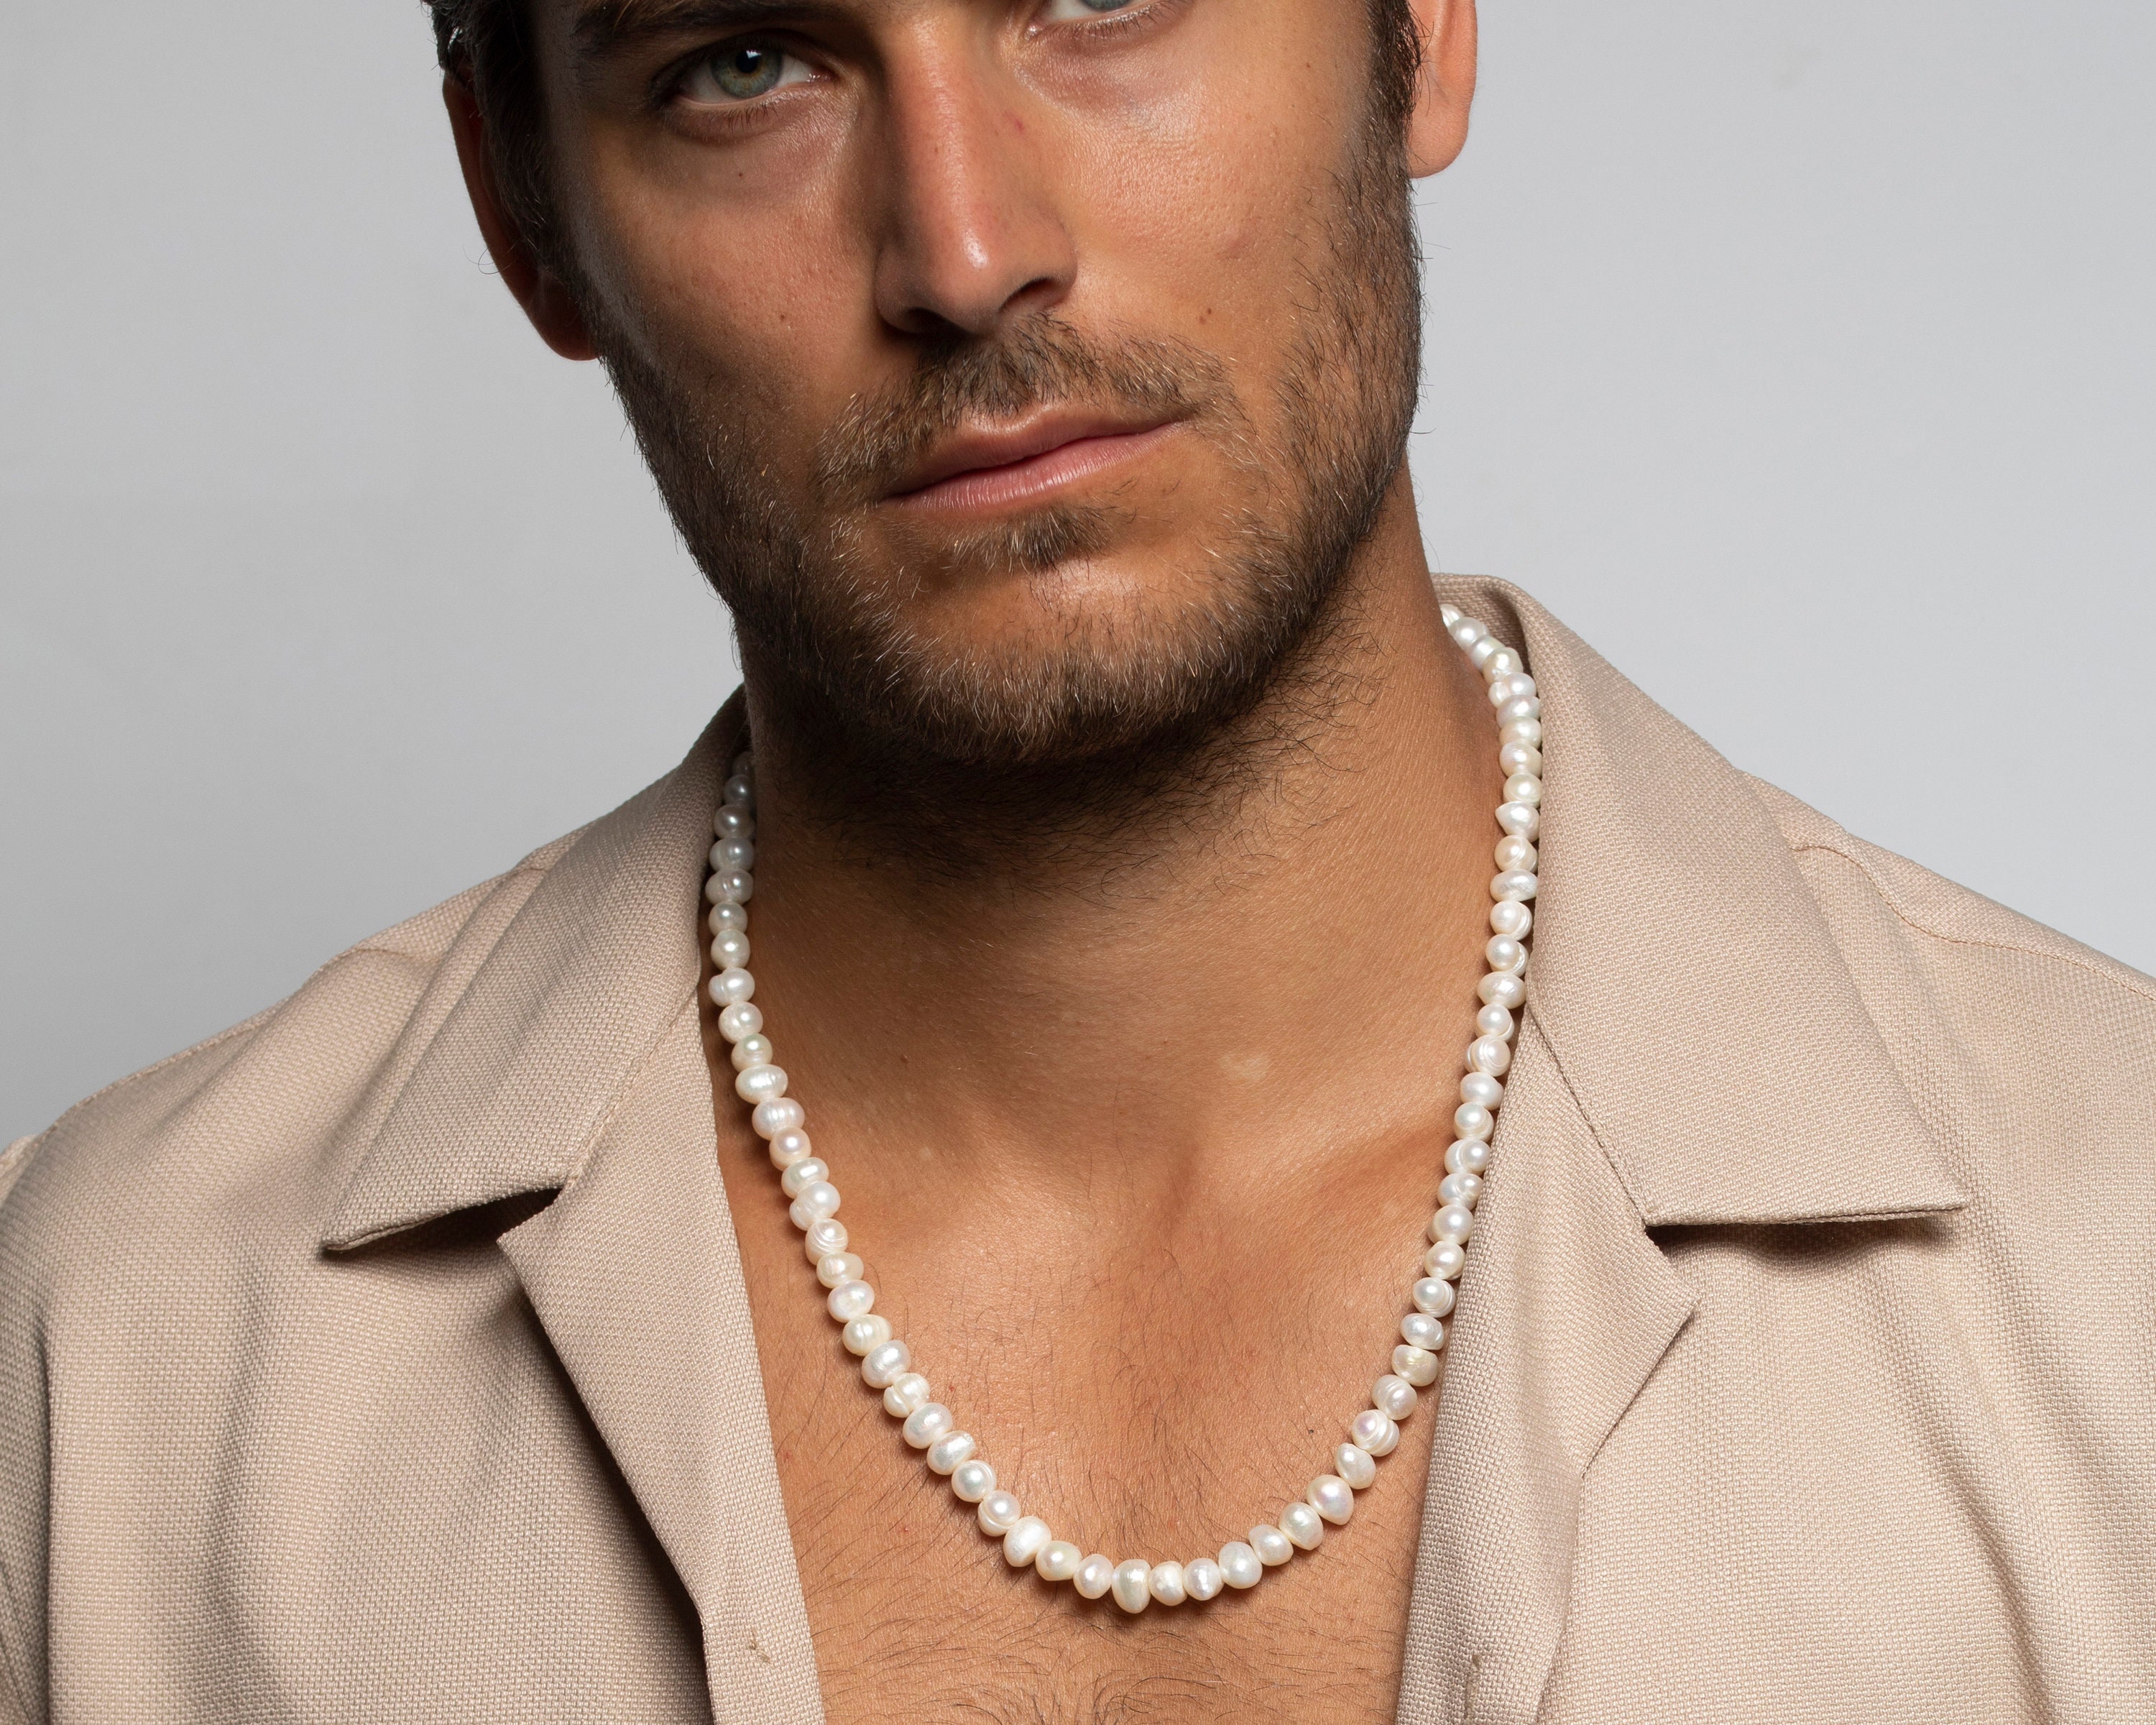 The Design Trend of Men's Pearl Necklace | FinancialContent Business Page